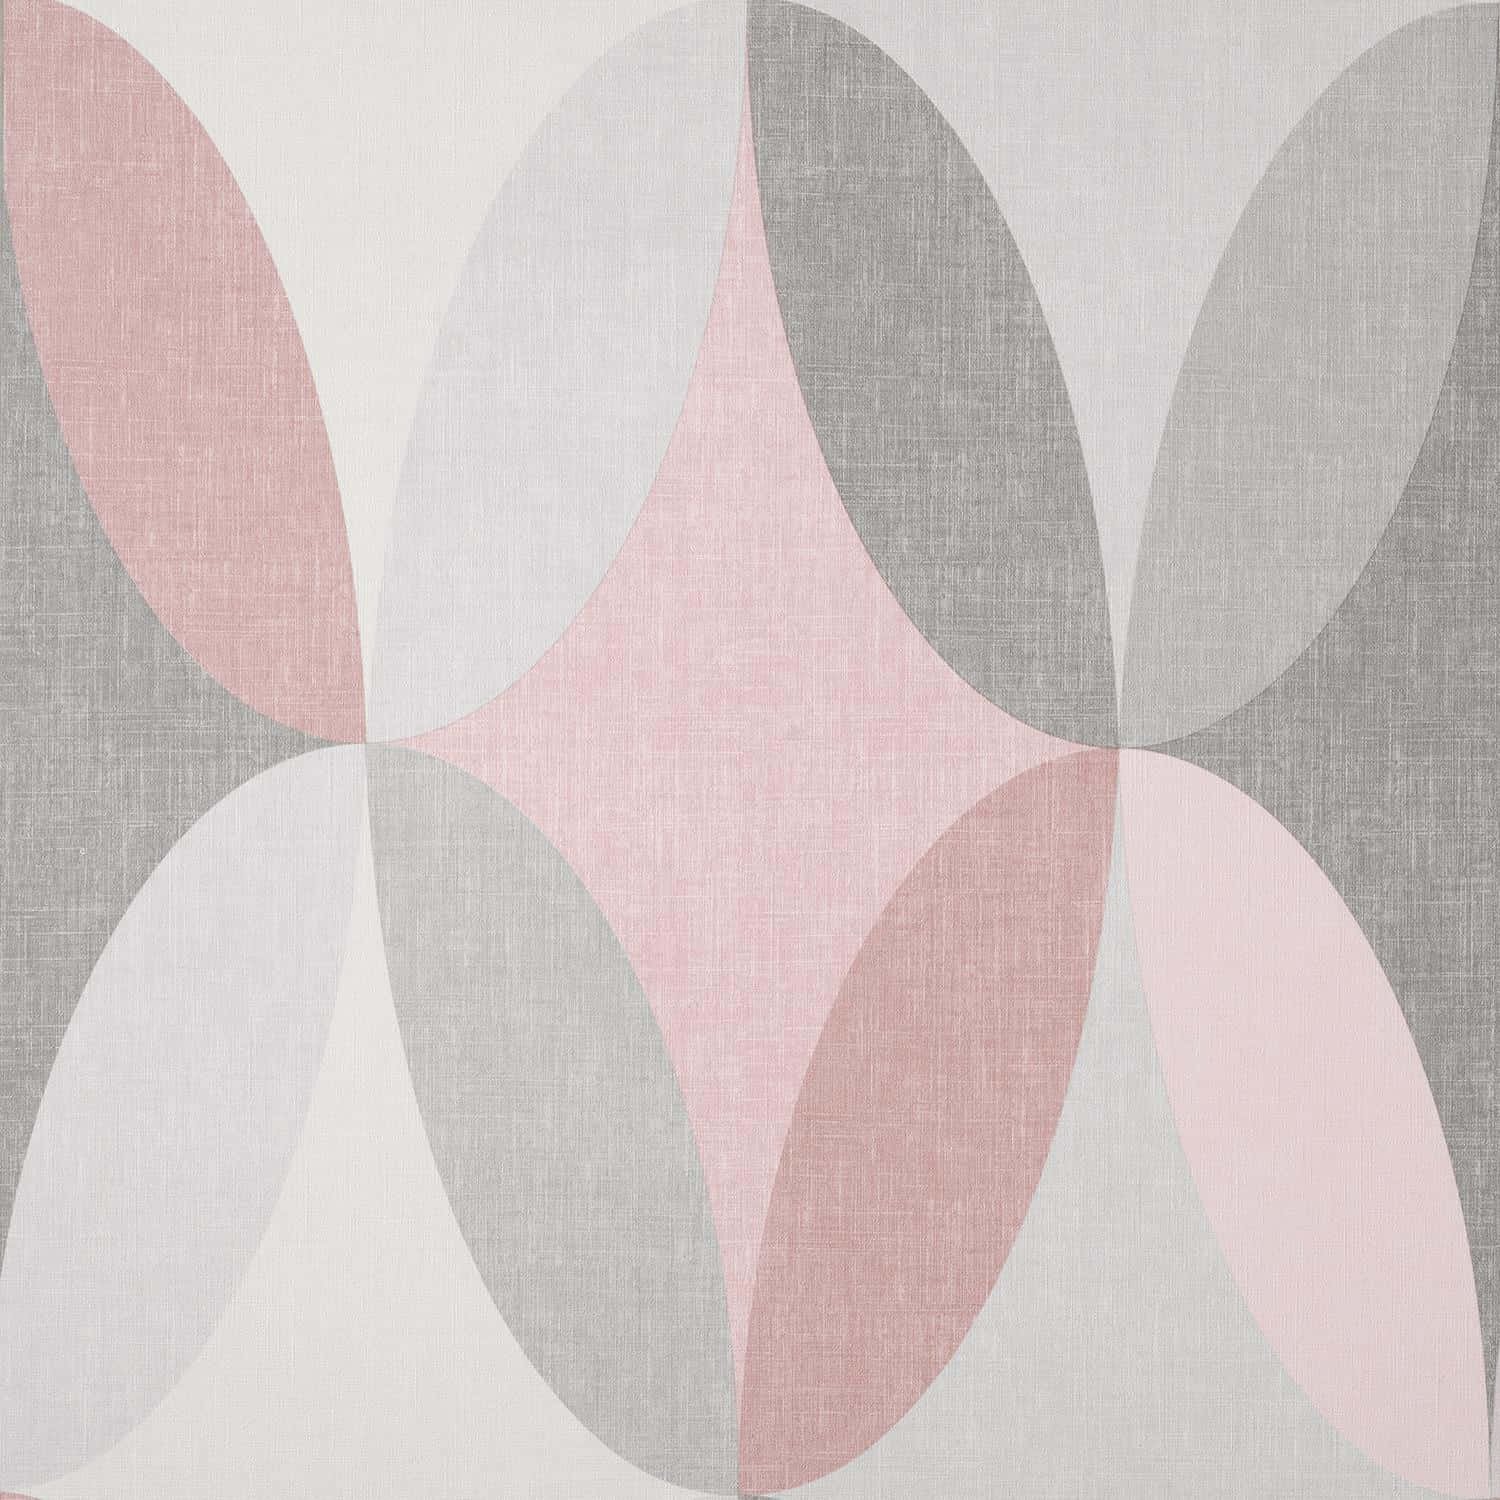 Oval Shape In Muted Colors Wallpaper